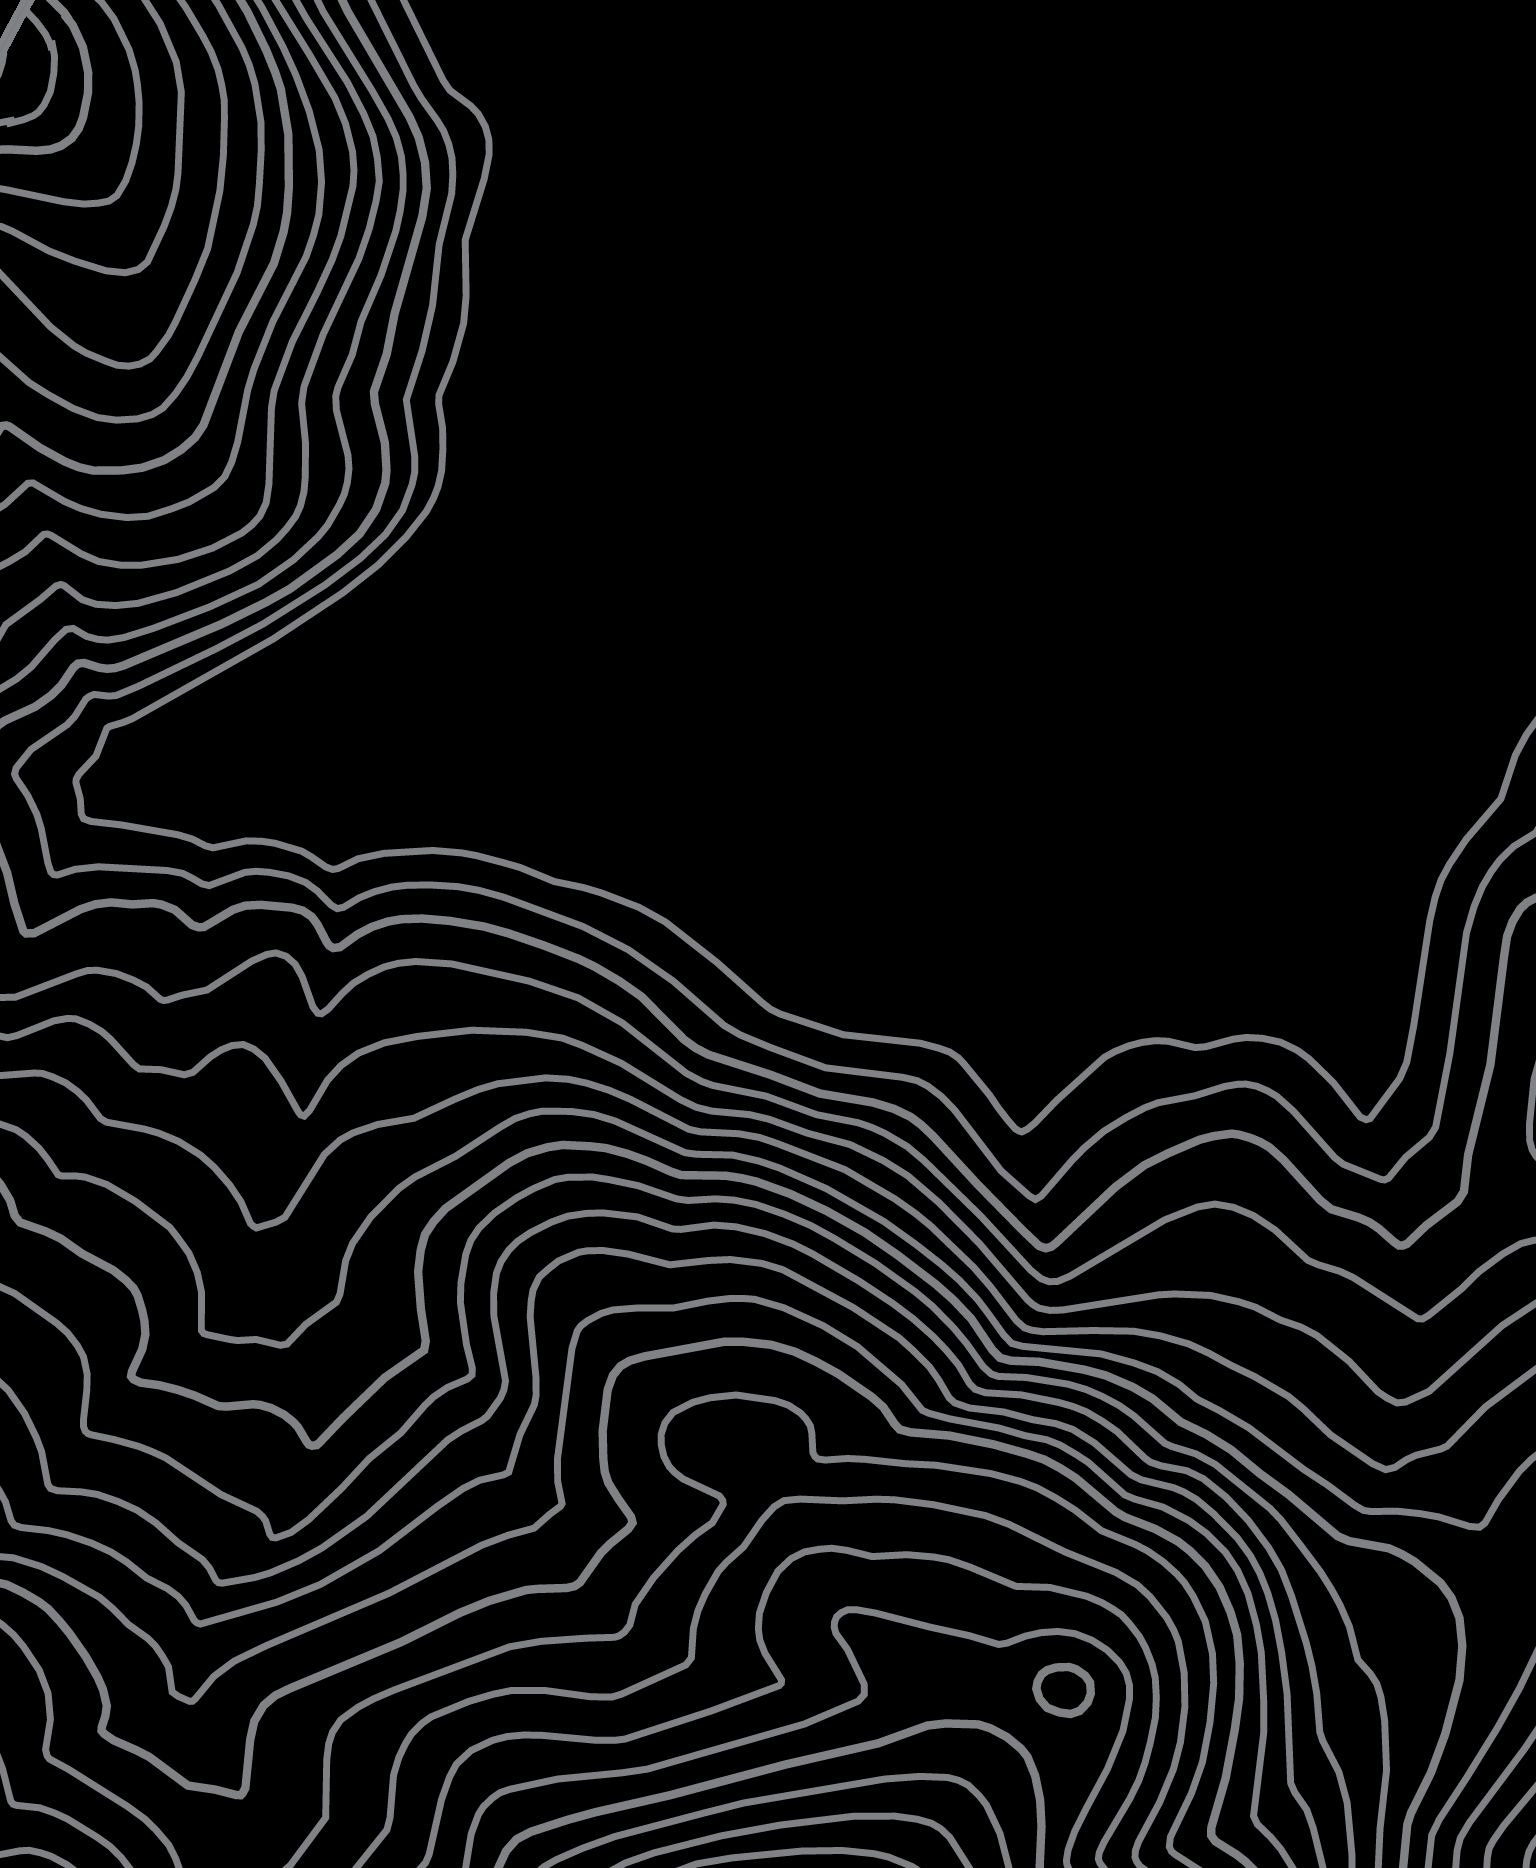 Looking for Audio Responsive Wallpaper with Contour Lines